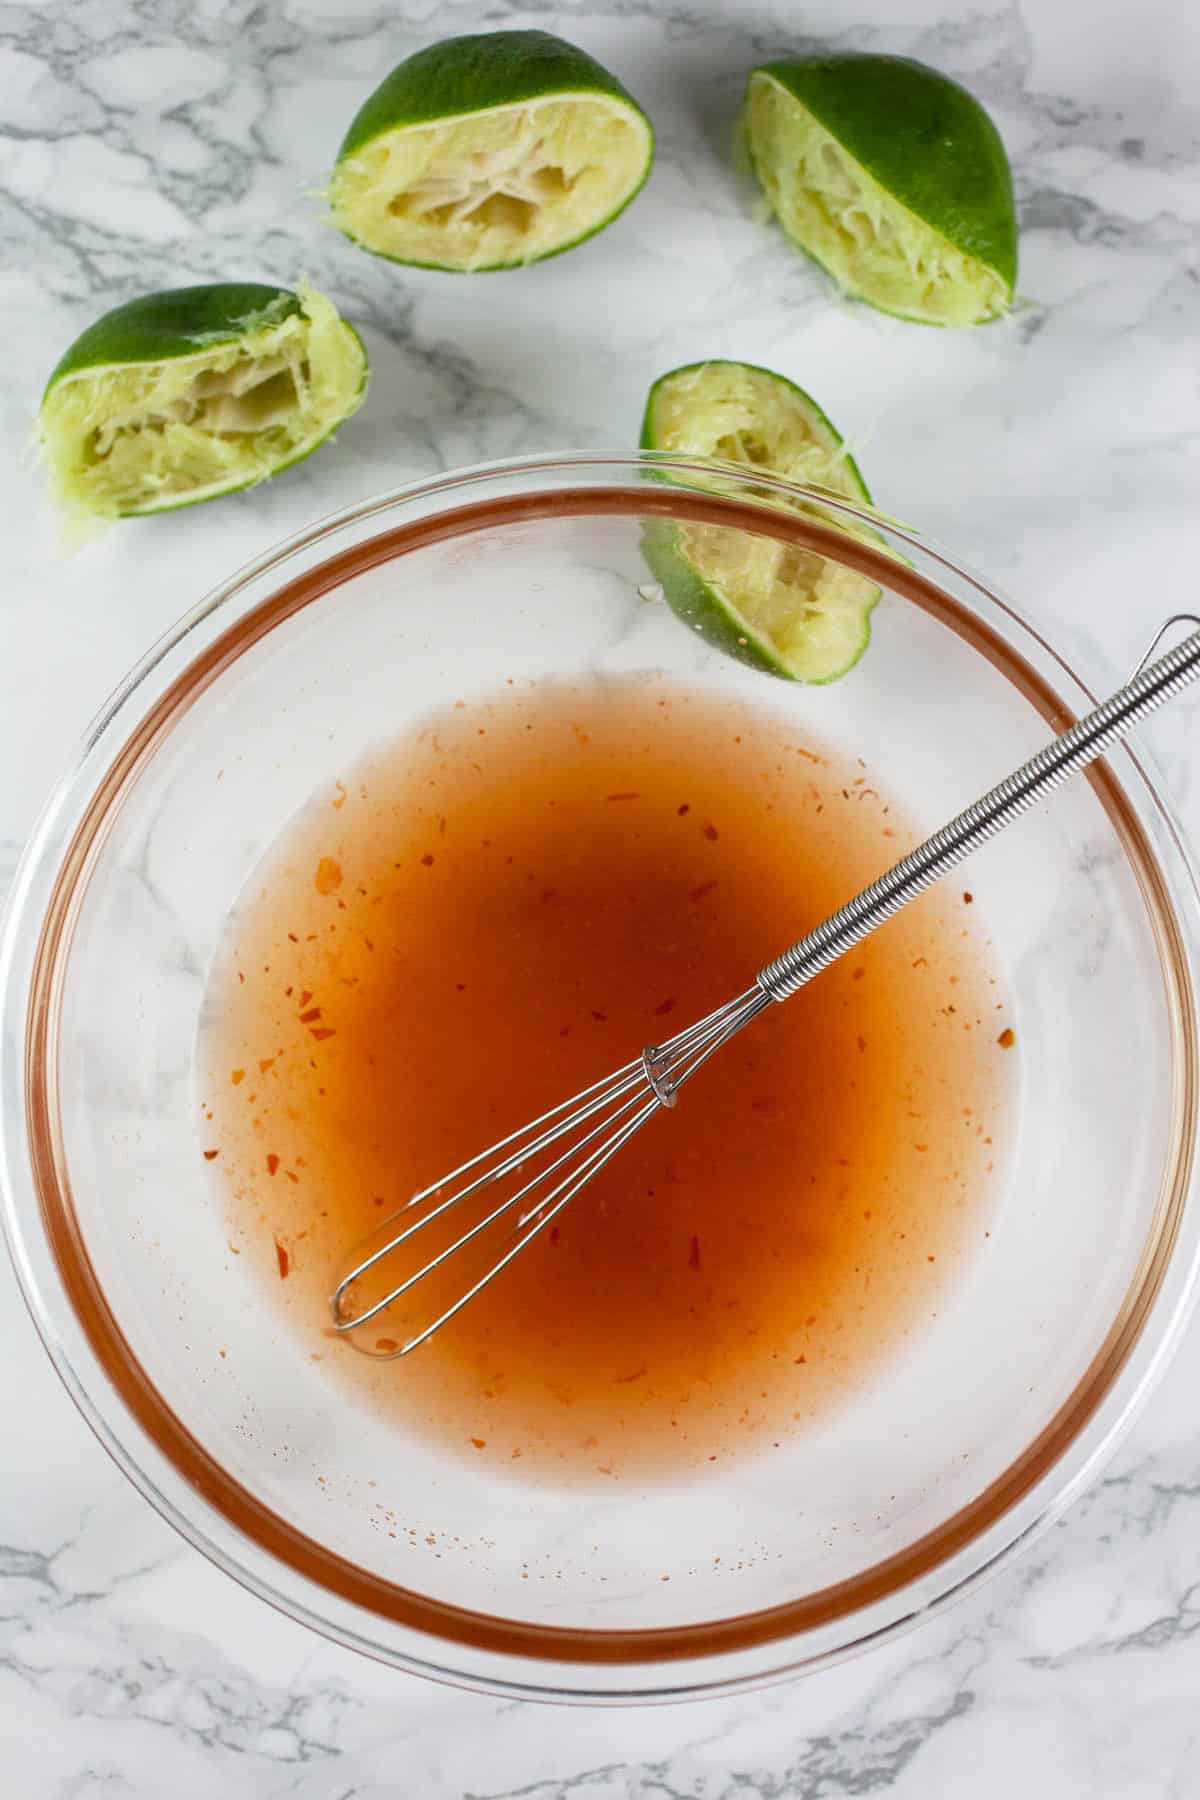 Chili lime salad dressing in small glass bowl with whisk.